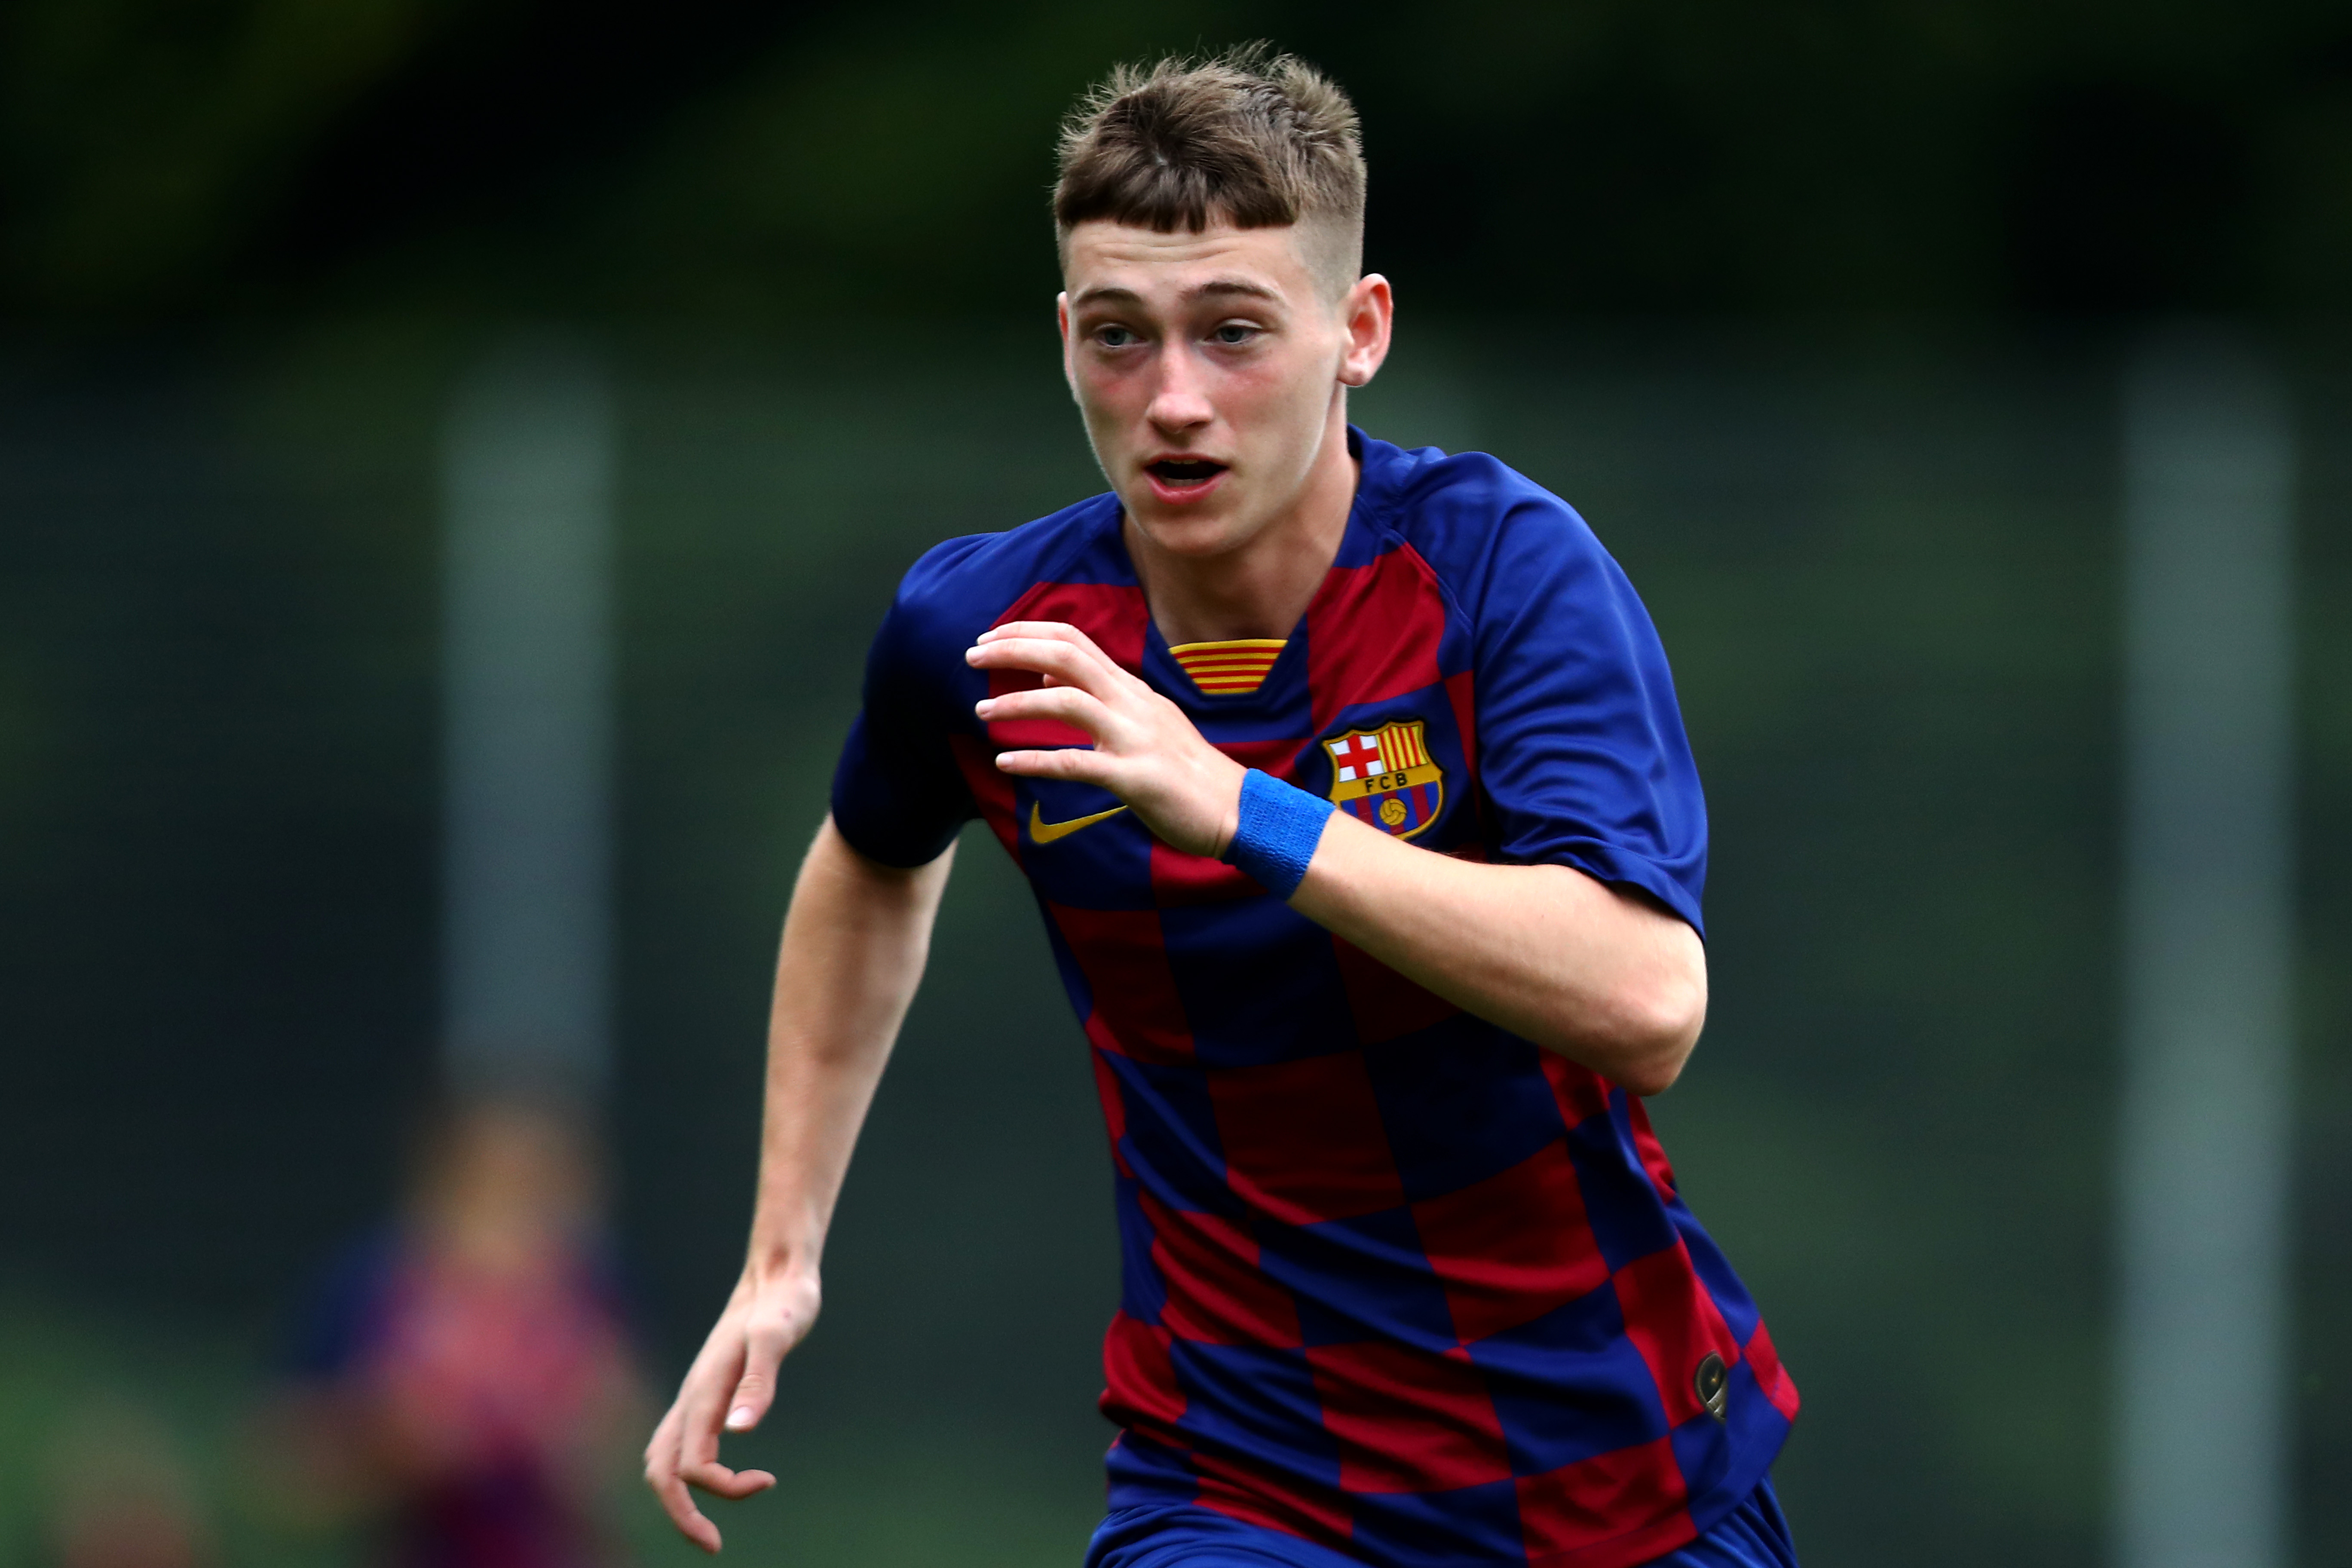 EINDHOVEN, NETHERLANDS - AUGUST 17:  Louie Mark Barry of FC Barcelona in action during The Otten Cup match between PSV Eindhoven and FC Barcelona held at De Herdgang, the training ground & youth academy field of PSV Eindhoven on August 17, 2019 in Eindhoven, Netherlands. (Photo by Dean Mouhtaropoulos/Getty Images)